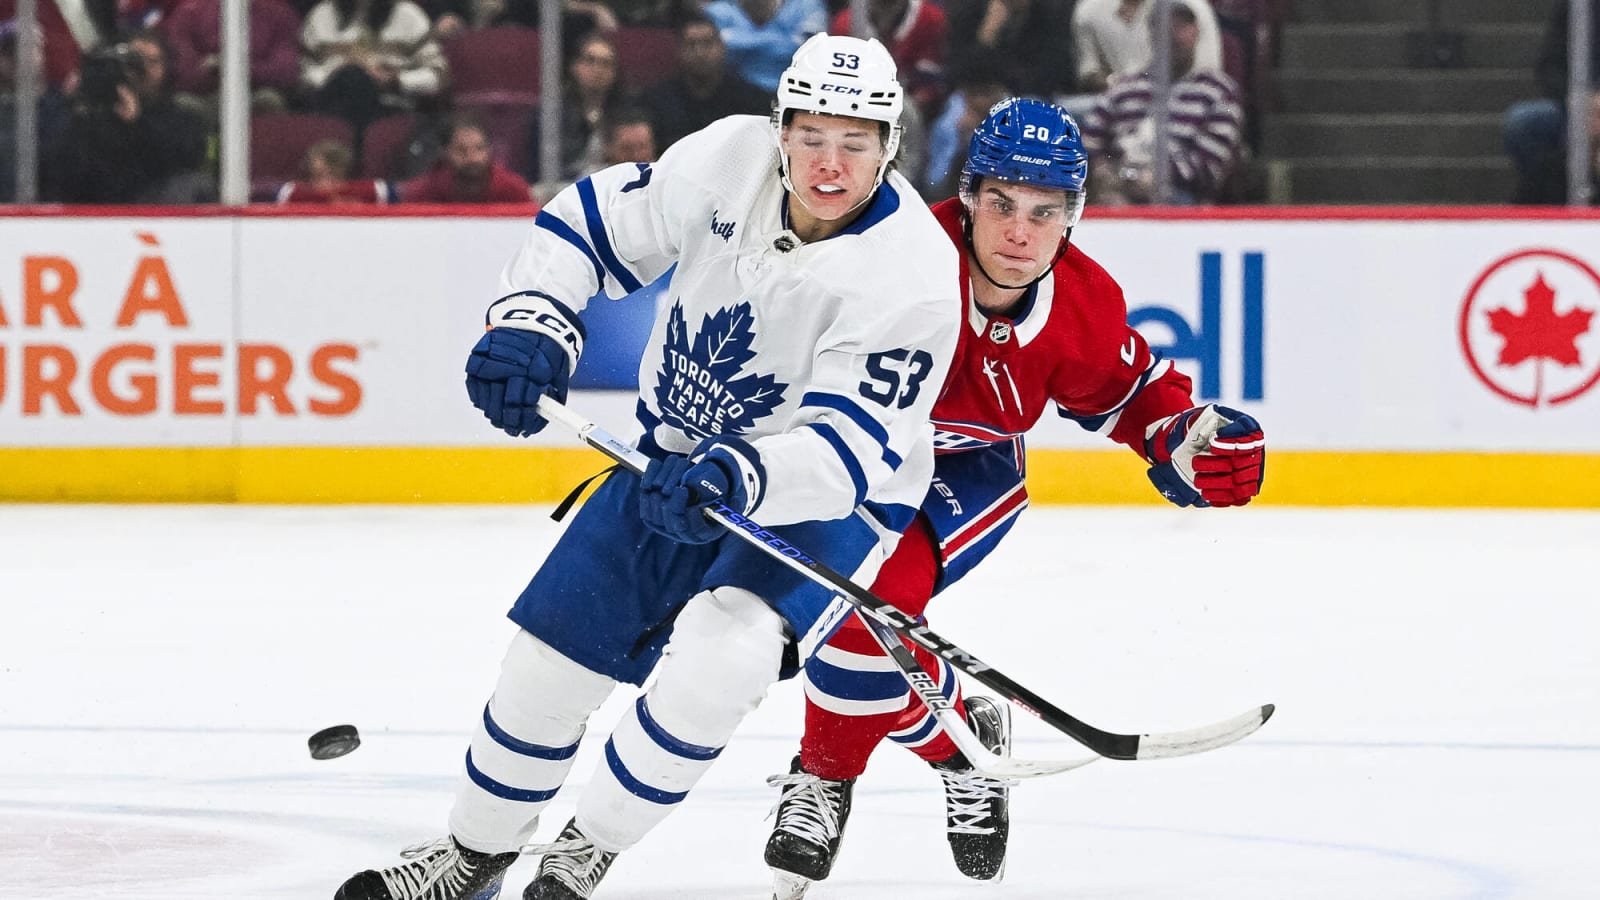 Cowan joins Marner in Knights record book, Minten making his mark: Leafs Prospect Roundup